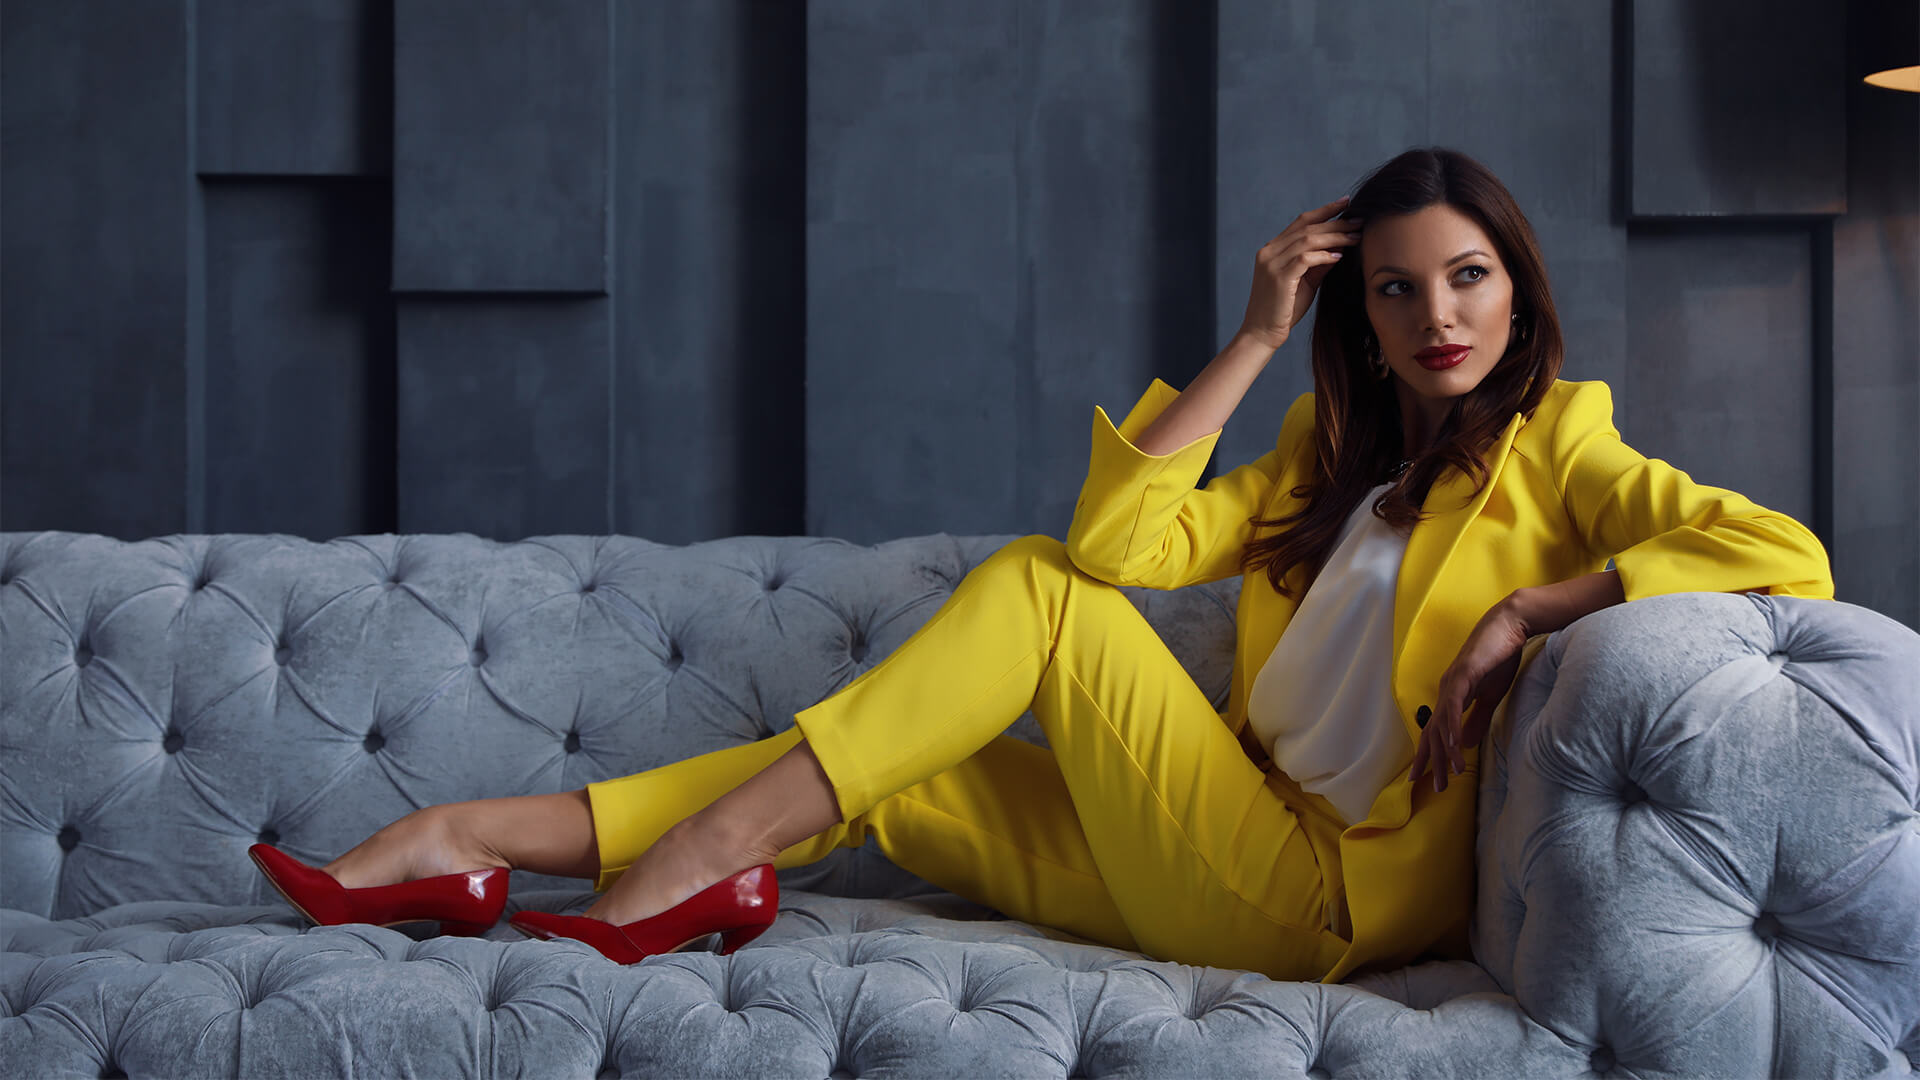 Female beauty CEO in a bright suit on a luxurious grey velvet sofa